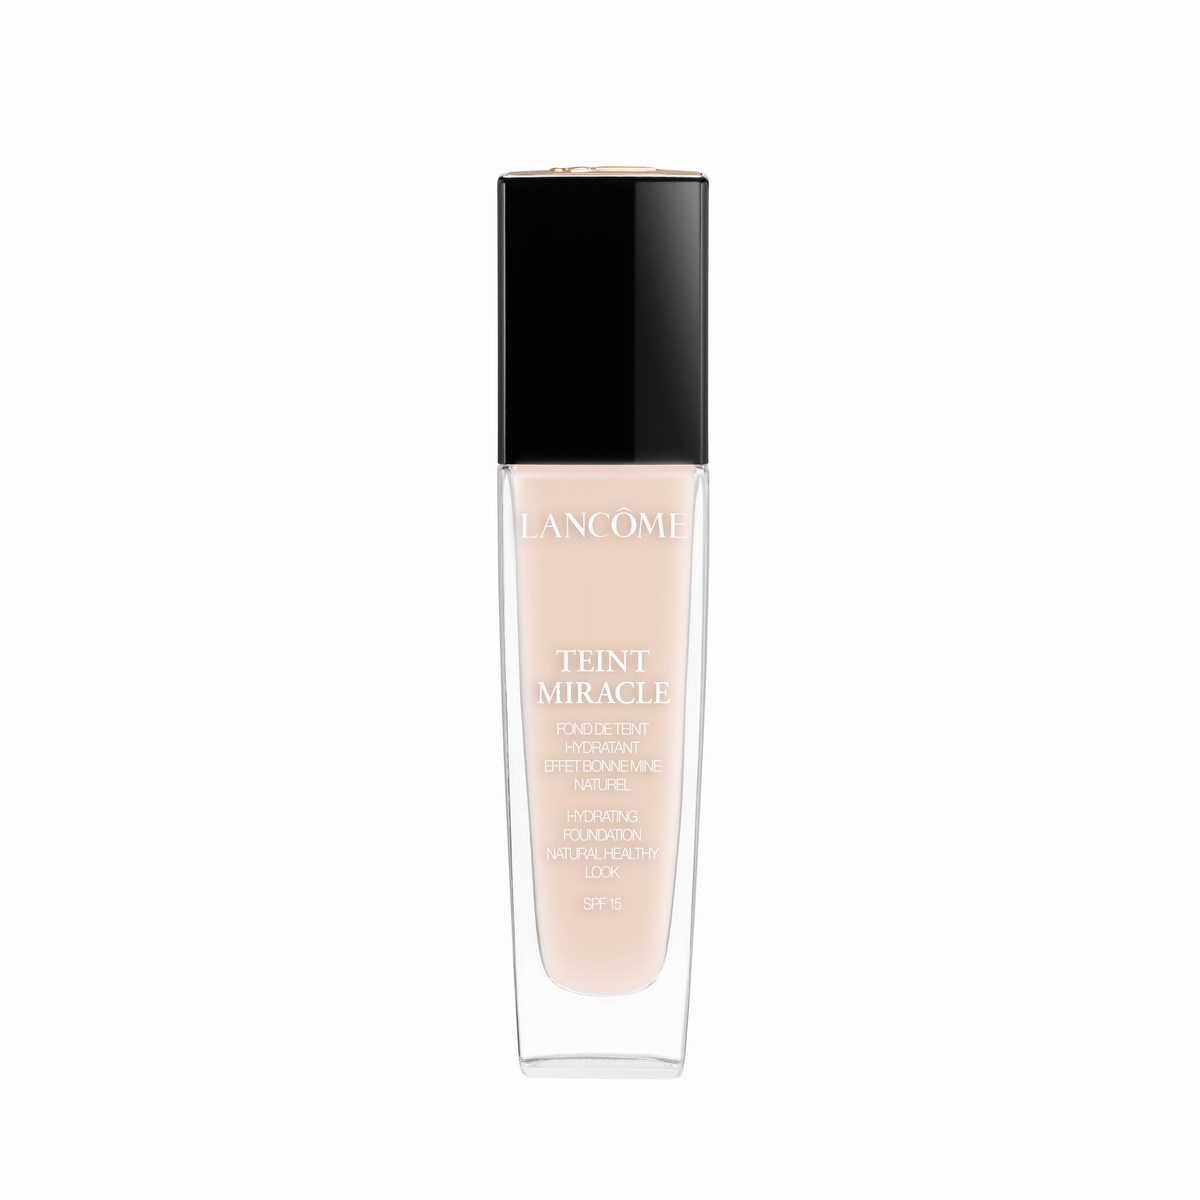  Teint Miracle Hydrating Foundation, 005 Beige Ivoire